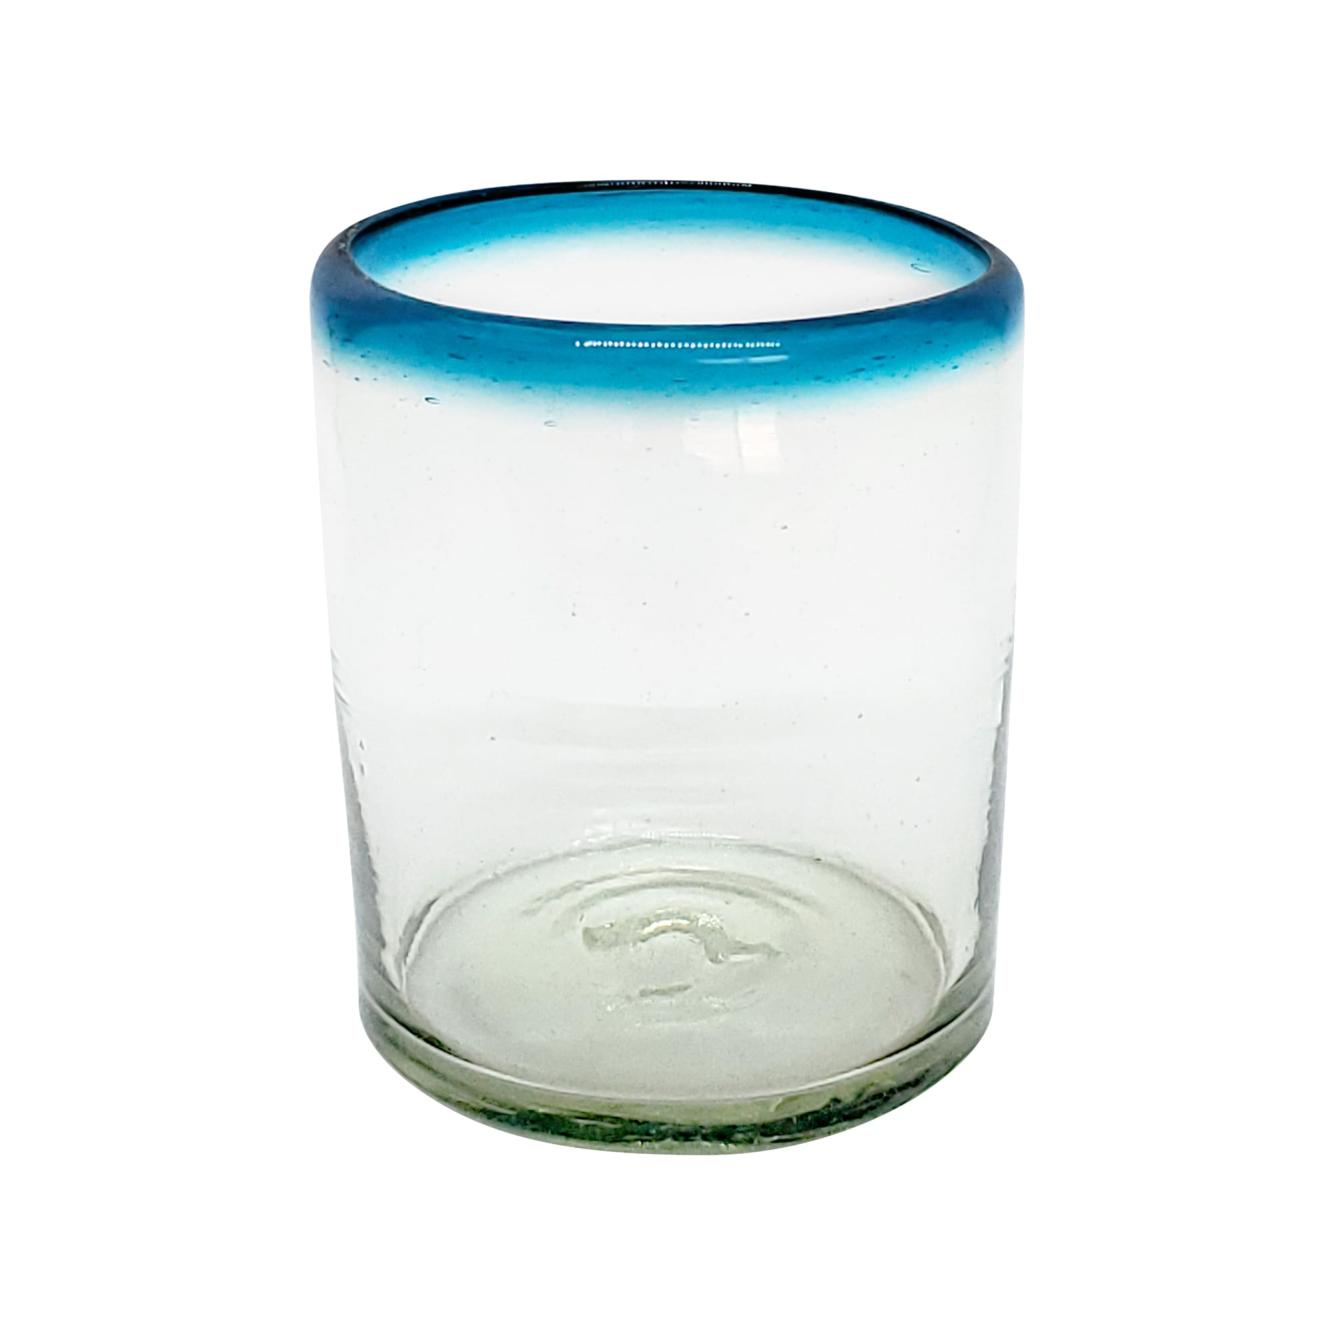 Colored Rim Glassware / Aqua Blue Rim 10 oz Tumblers (set of 6) / These tumblers are a great complement for your pitcher and drinking glasses set.<br>1-Year Product Replacement in case of defects (glasses broken in dishwasher is considered a defect).